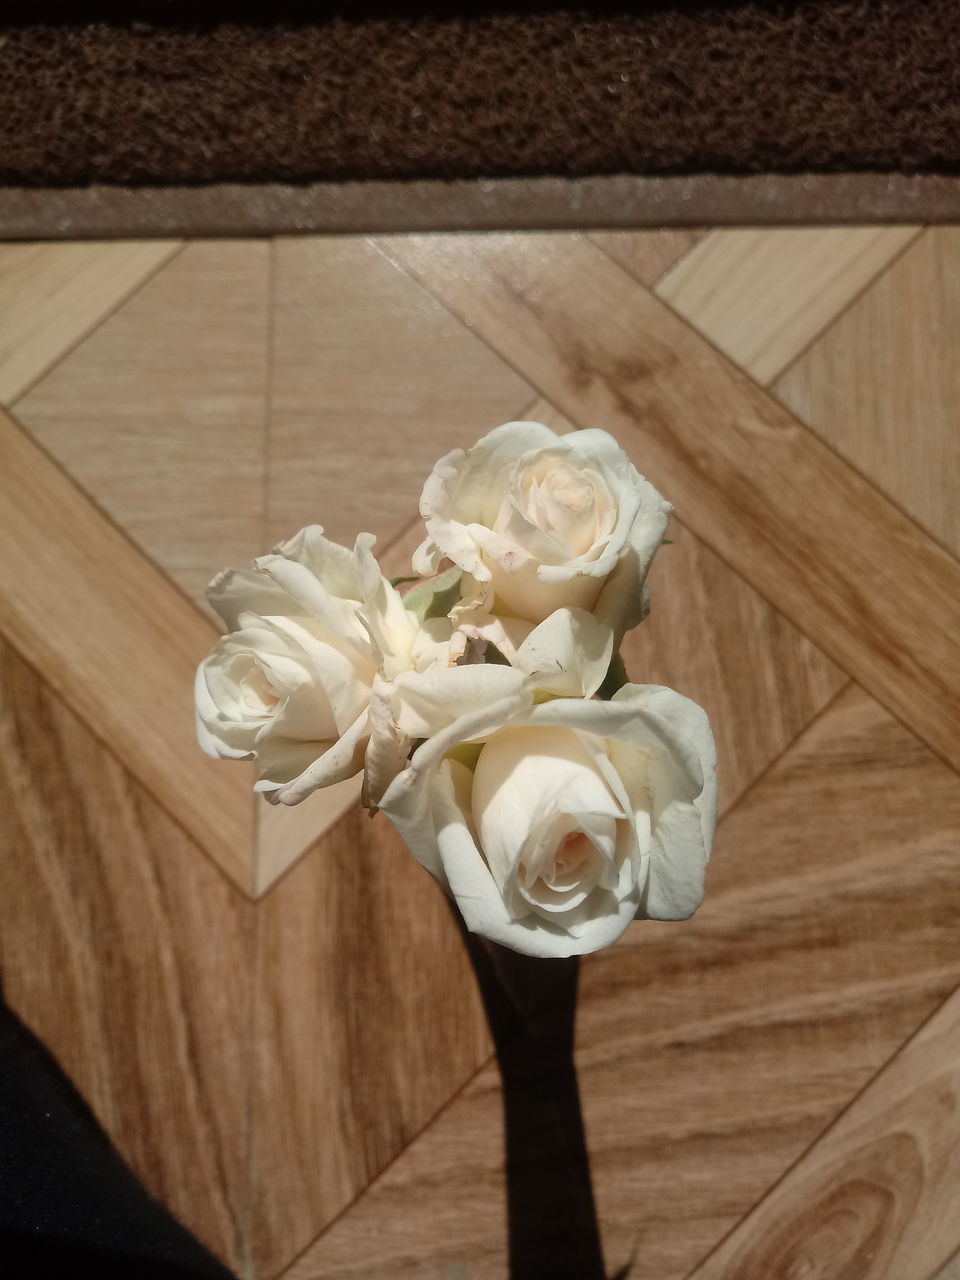 CLOSE-UP OF WHITE ROSE ON FLOOR